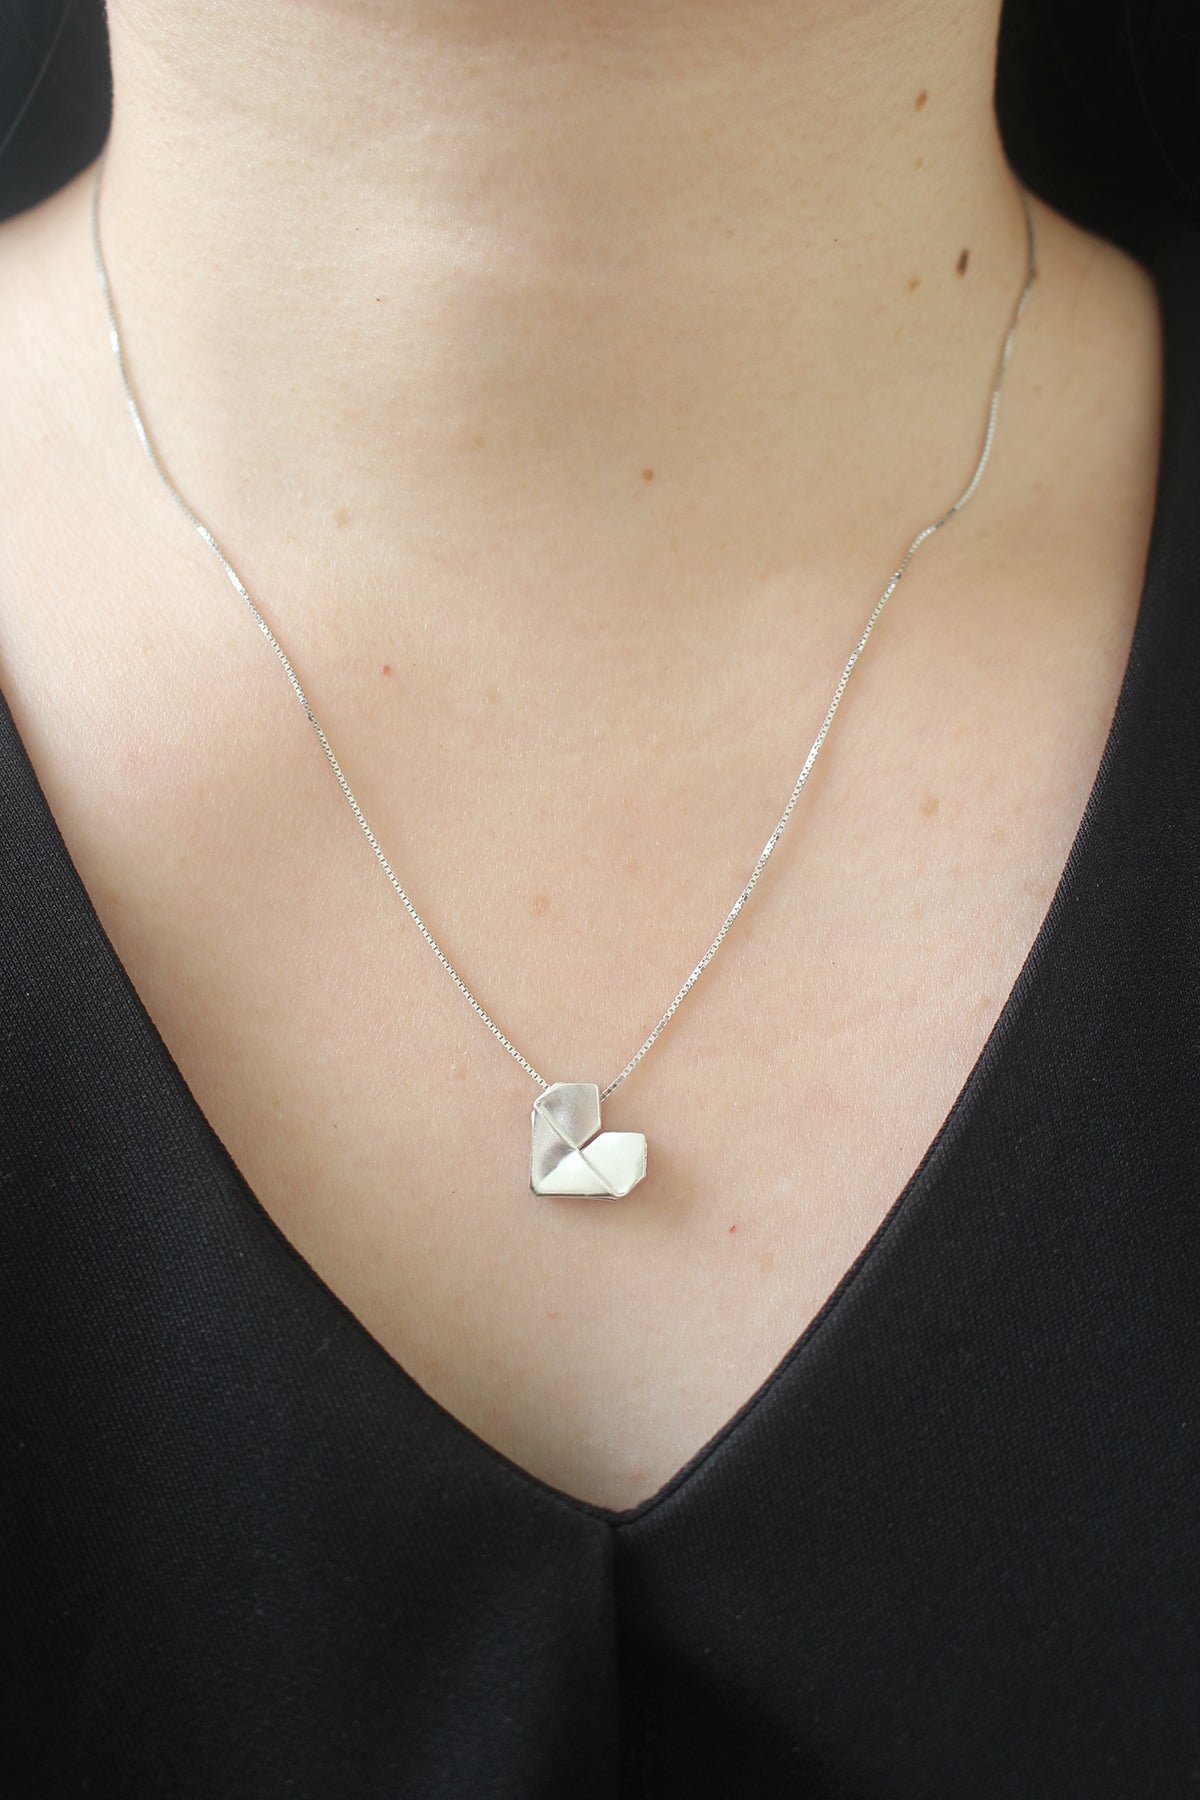 Trio Heart Necklace - Silver Origami Heart Necklace in Three Colors